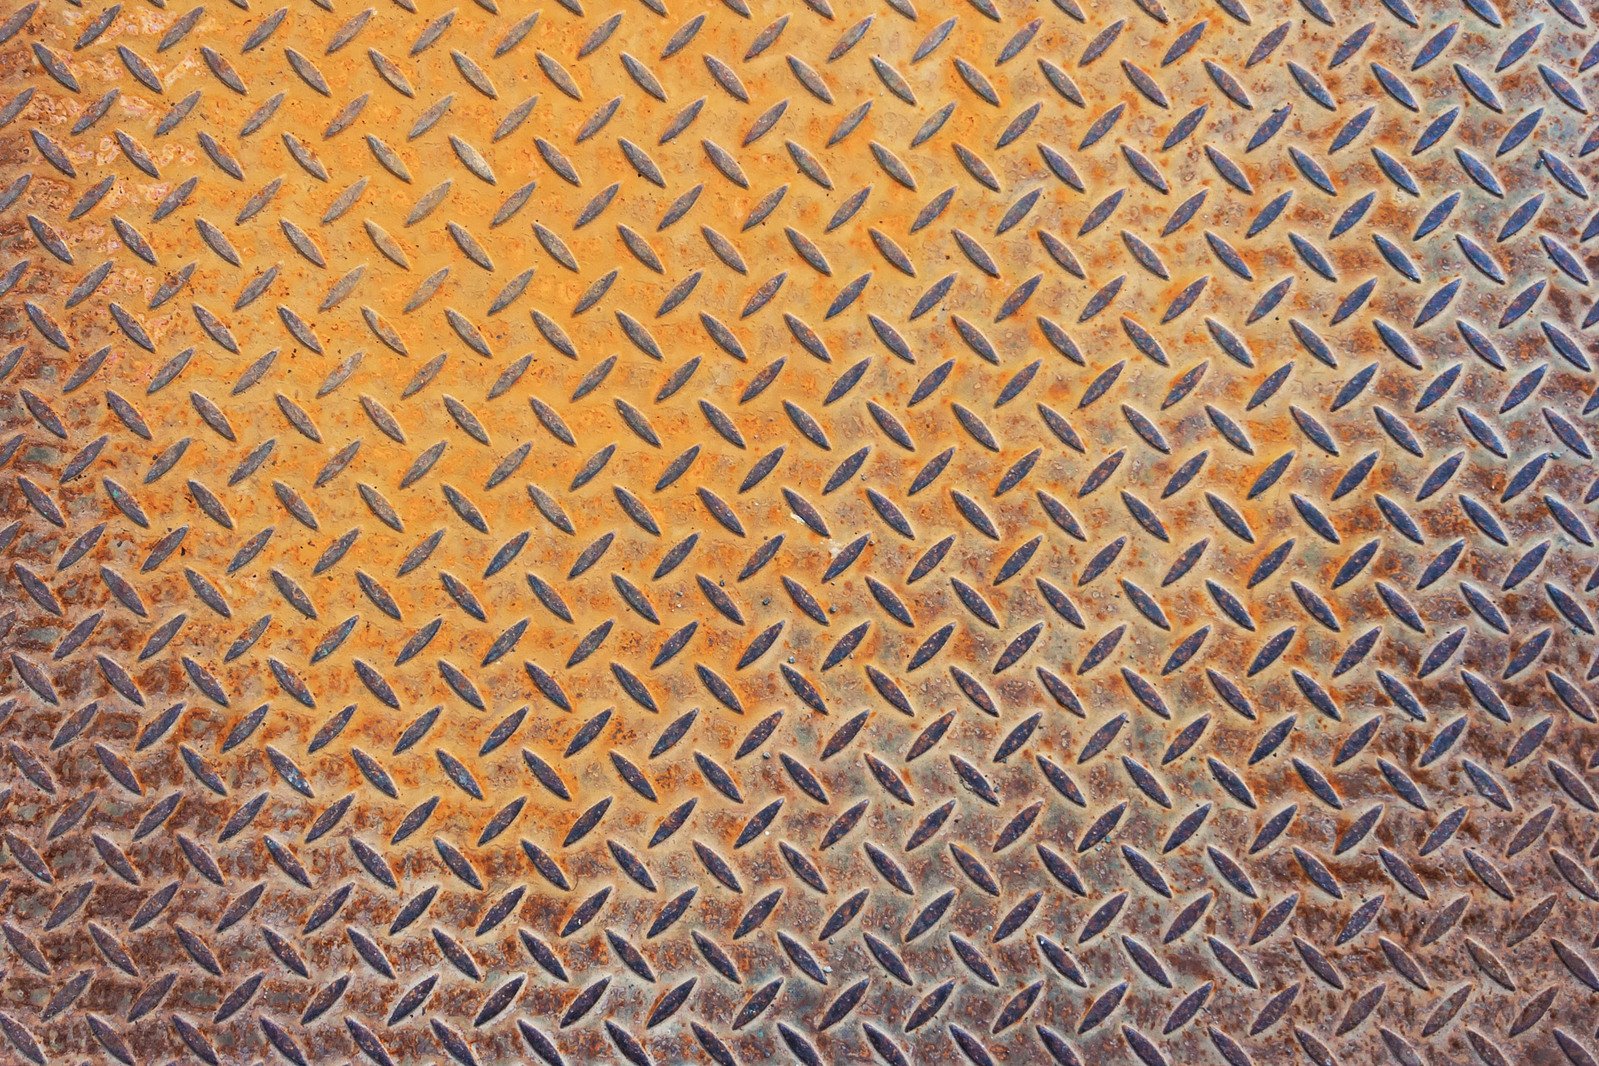 a metal surface with blue and yellow colors